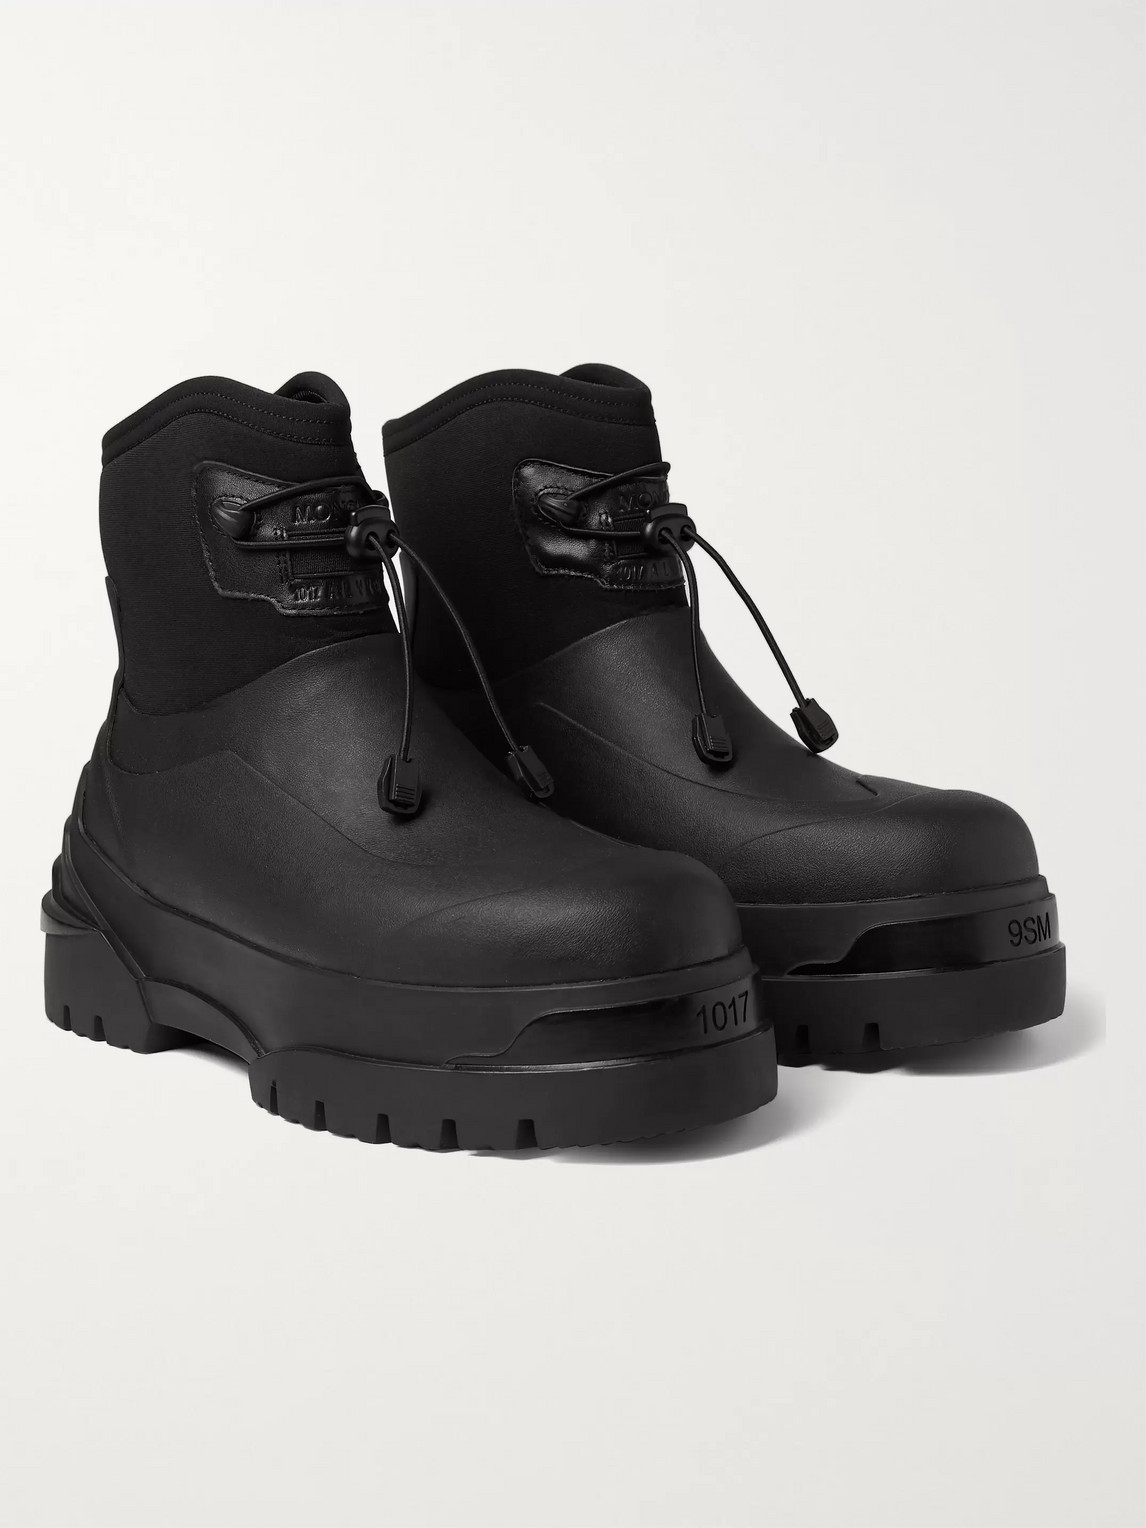 MONCLER GENIUS 6 MONCLER 1017 ALYX 9SM LEATHER-TRIMMED RUBBER AND NEOPRENE BOOTS